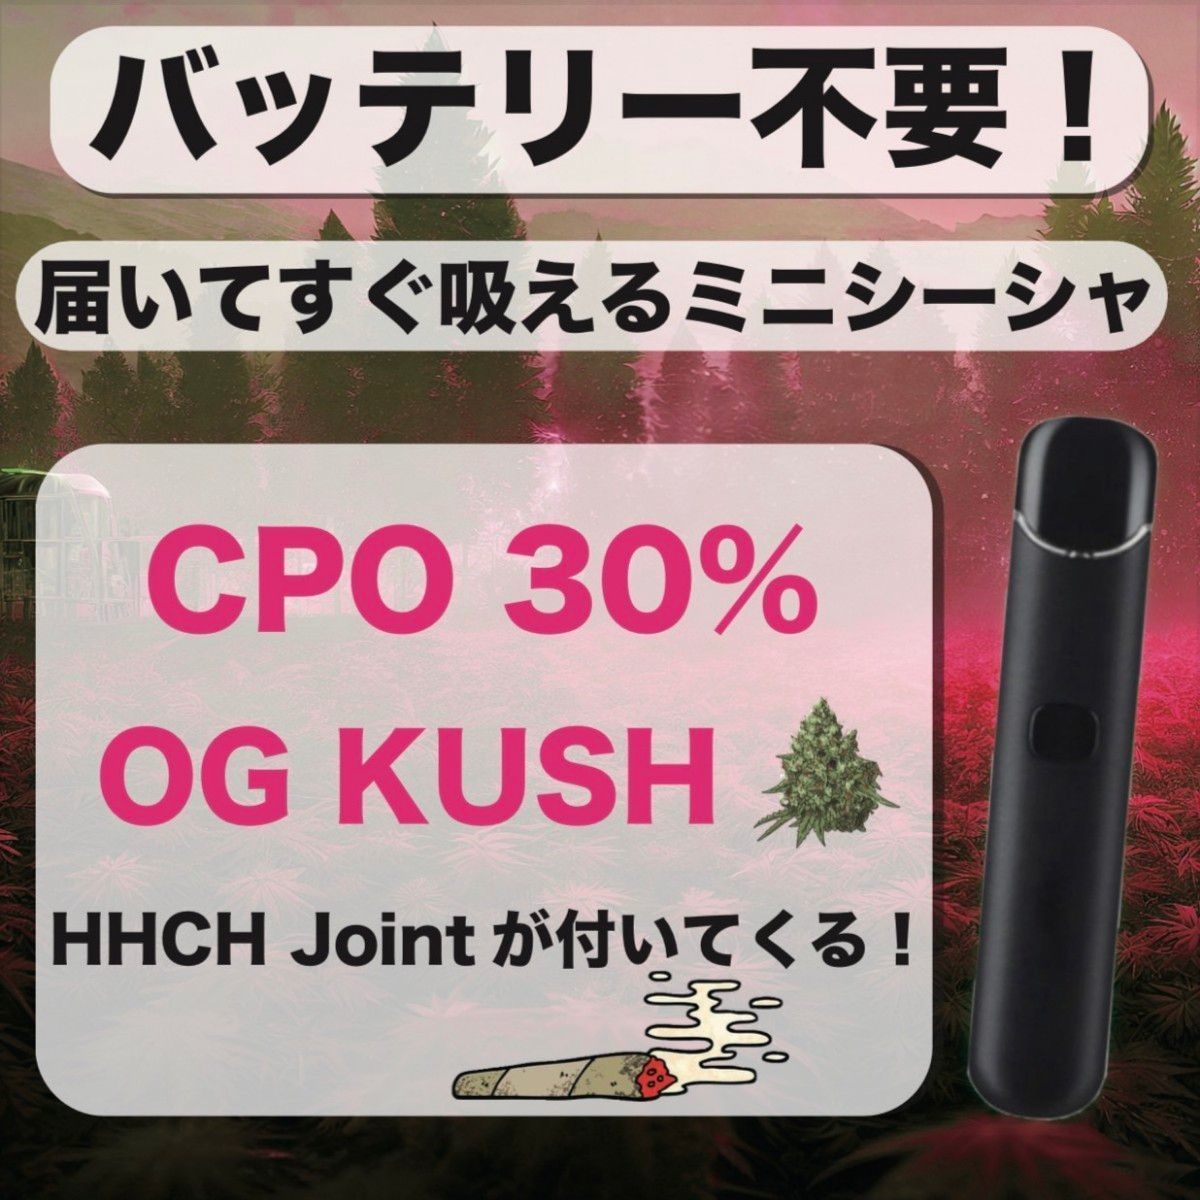 CPO 30% 1ml 使い捨てバッテリー HHCH Joint付き-